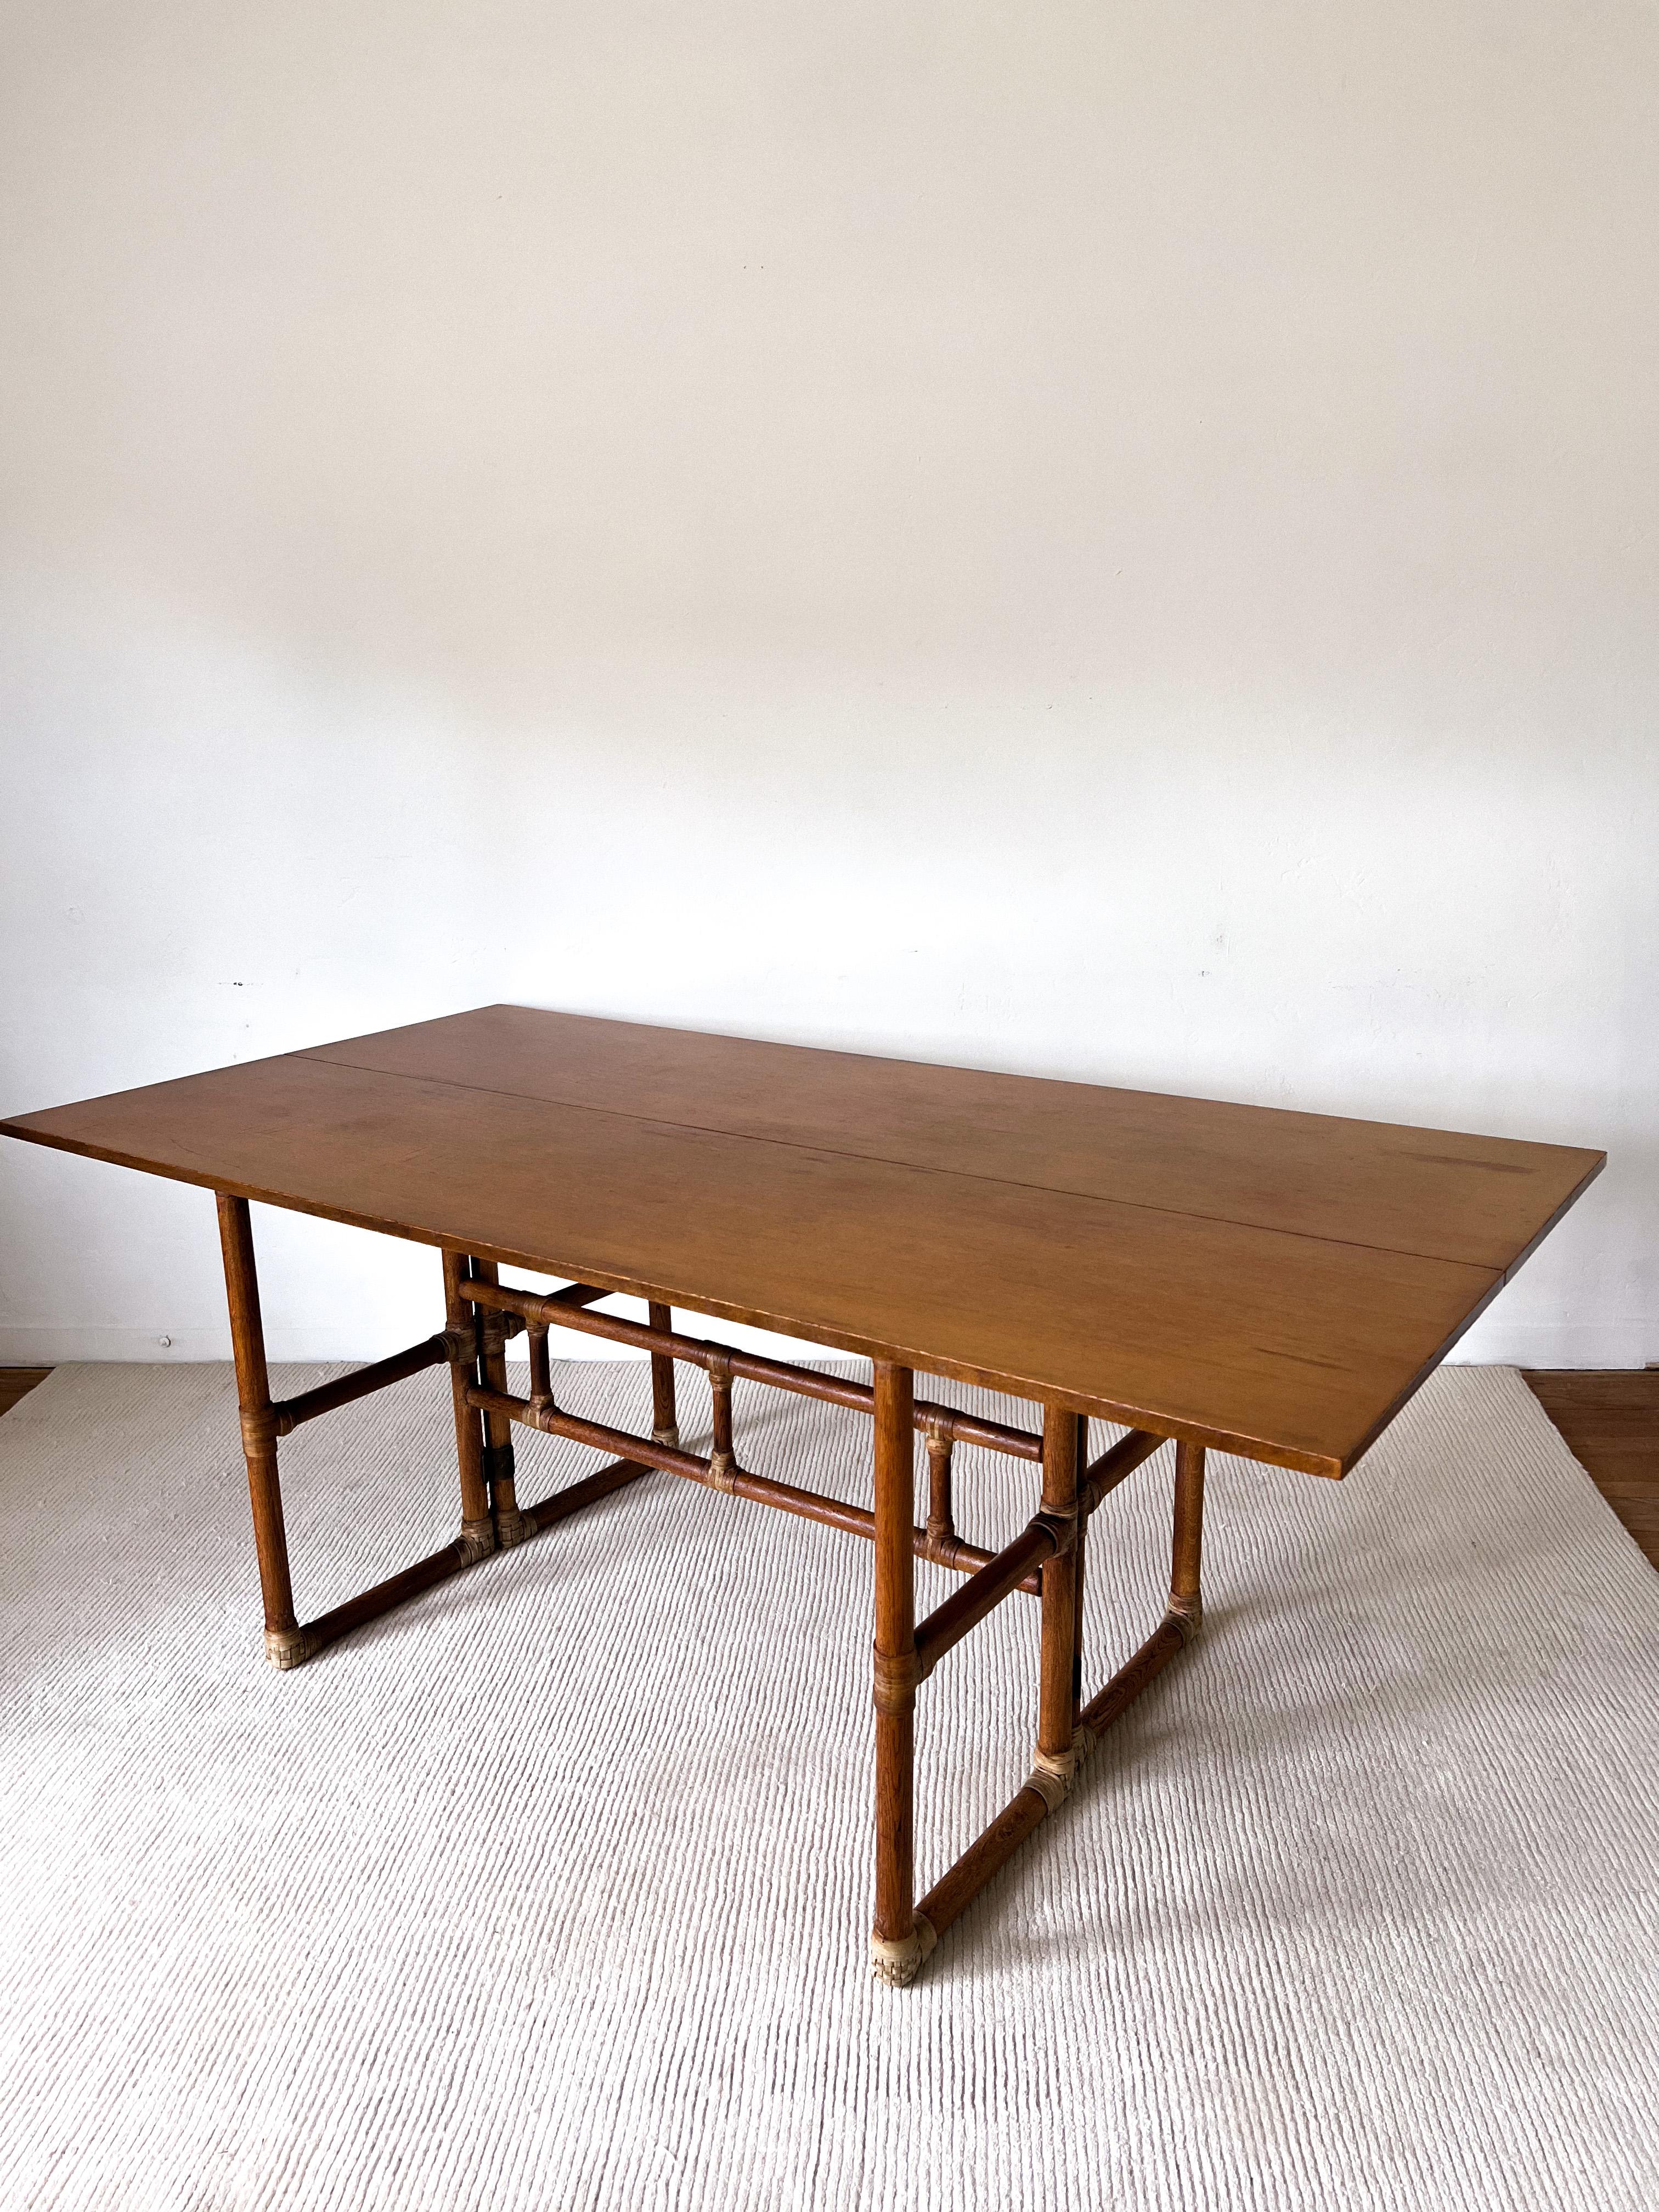 Late 20th Century 1970s Bamboo Flip-Top Dining Table by McGuire